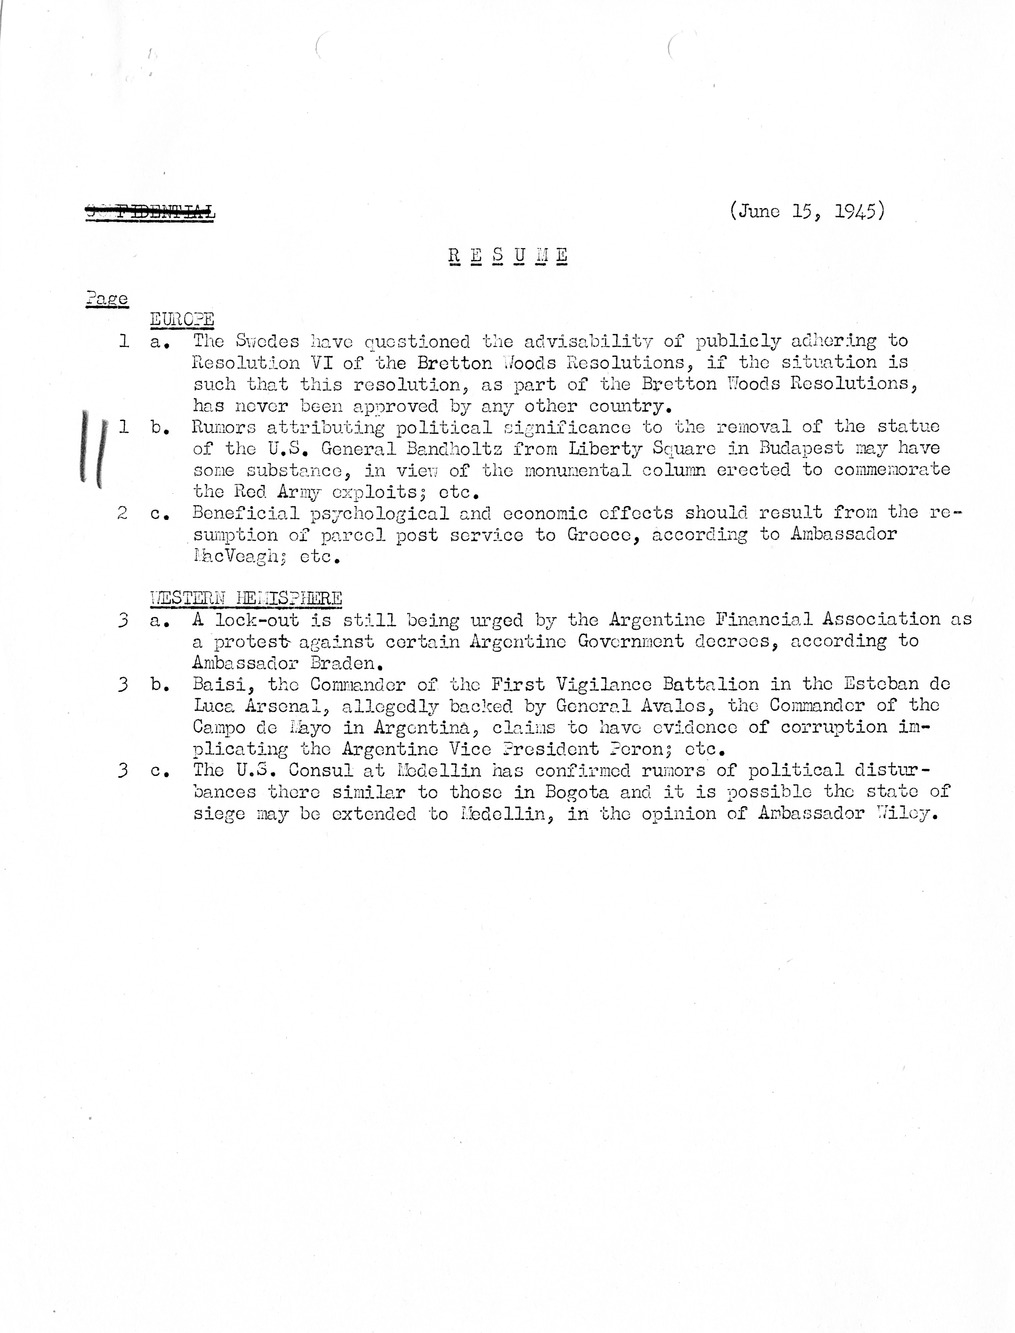 Brief of Telegrams of the Department of State Prepared by Division of Naval Intelligence